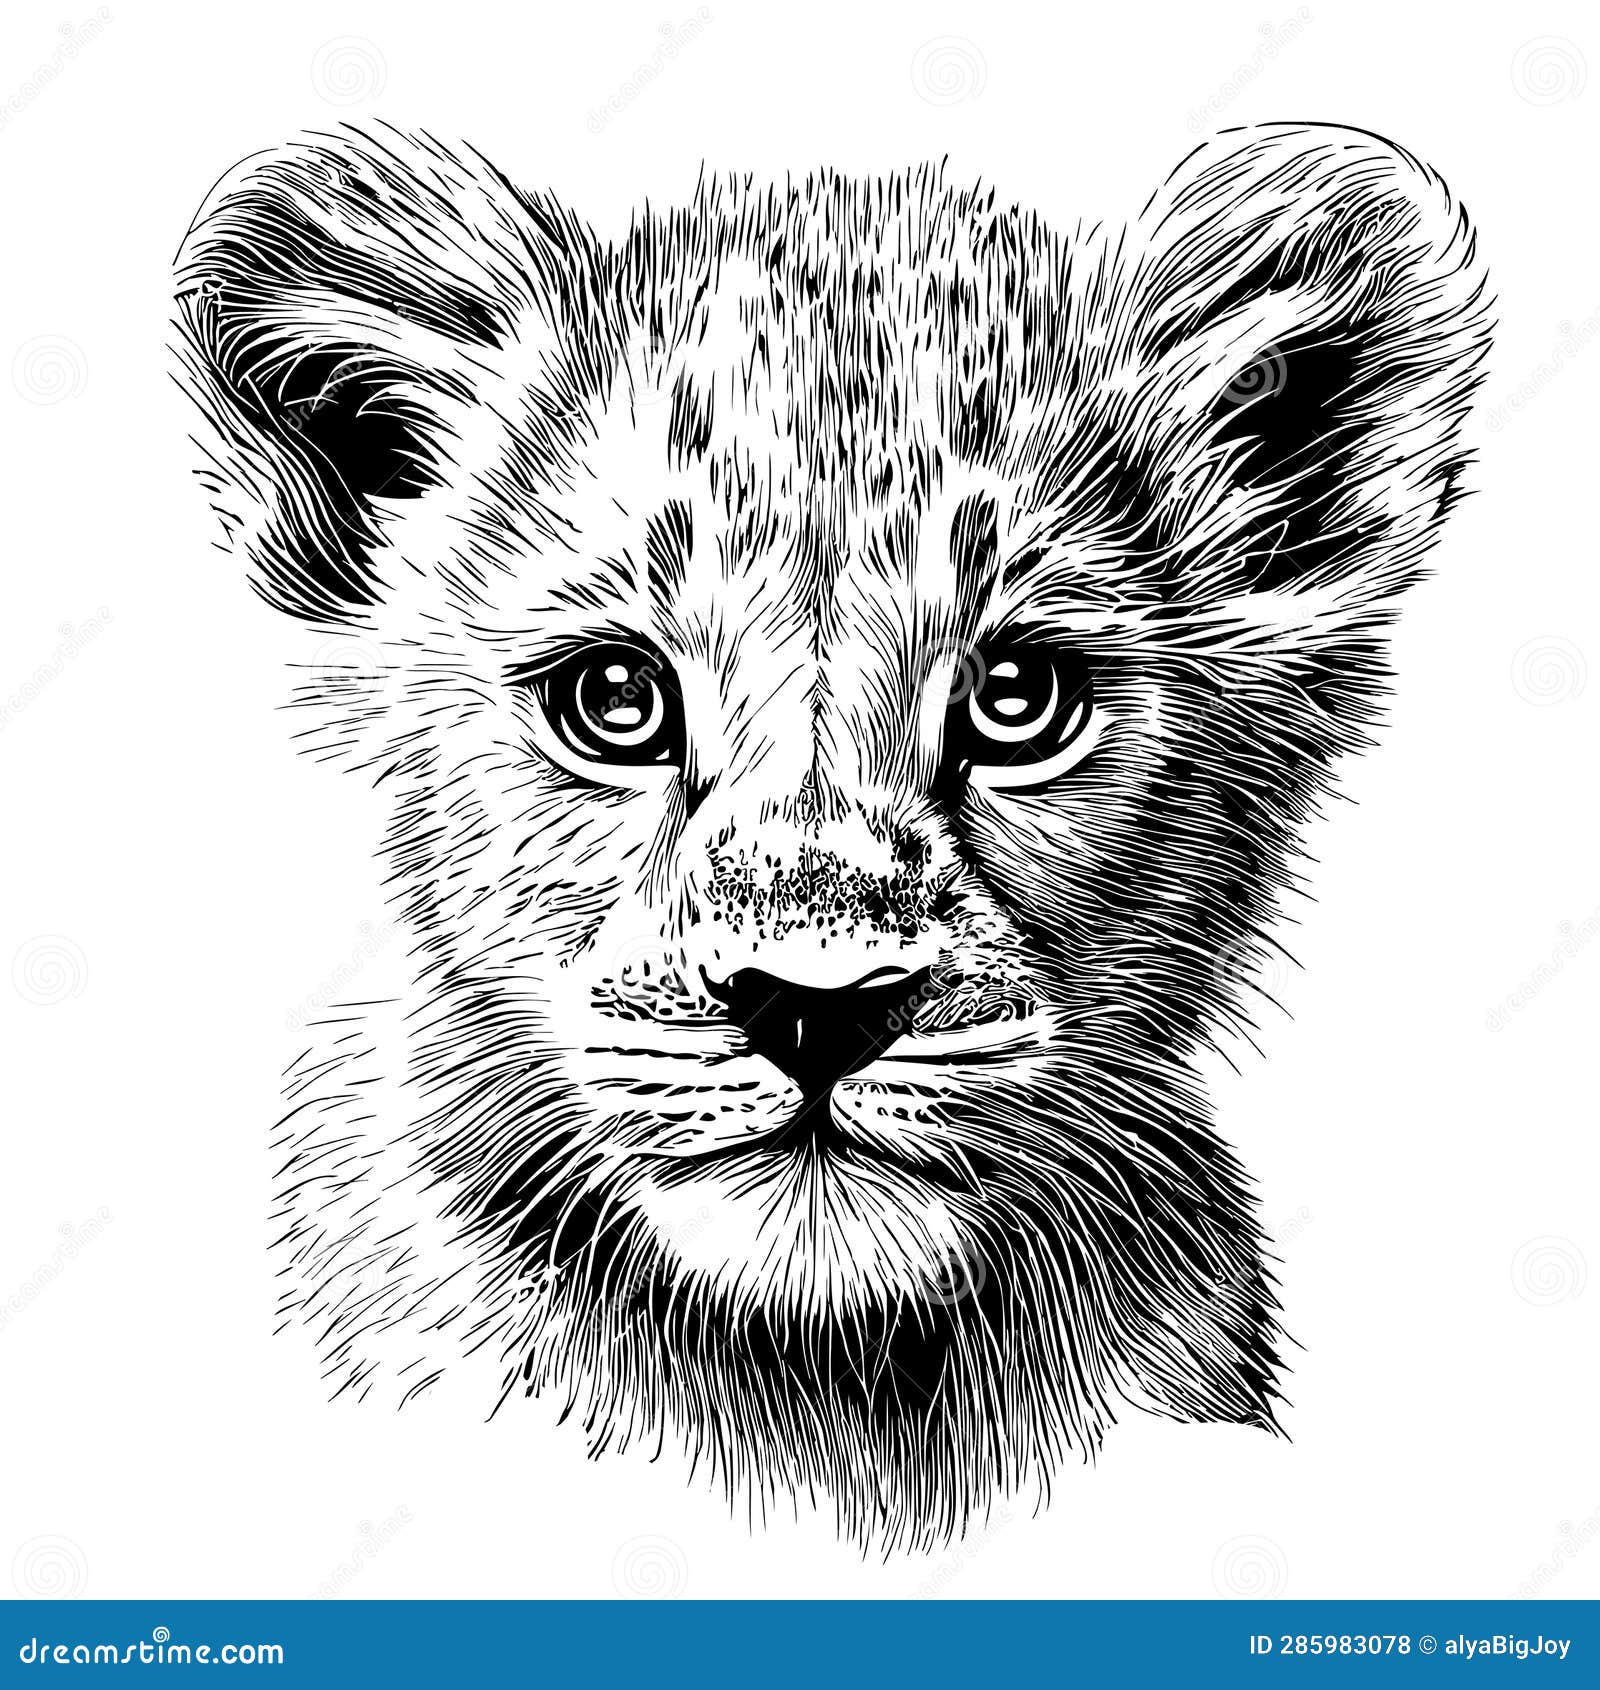 How to draw a lion cub like Simba from the Lion King - YouTube